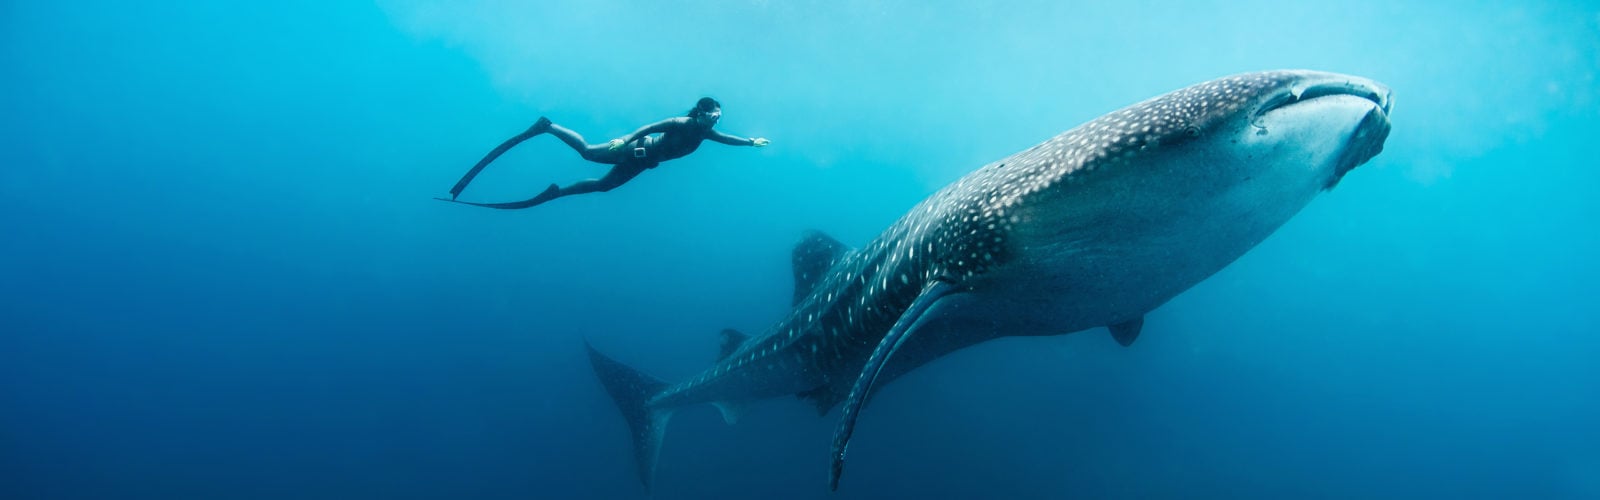 Scuba diver with whale shark